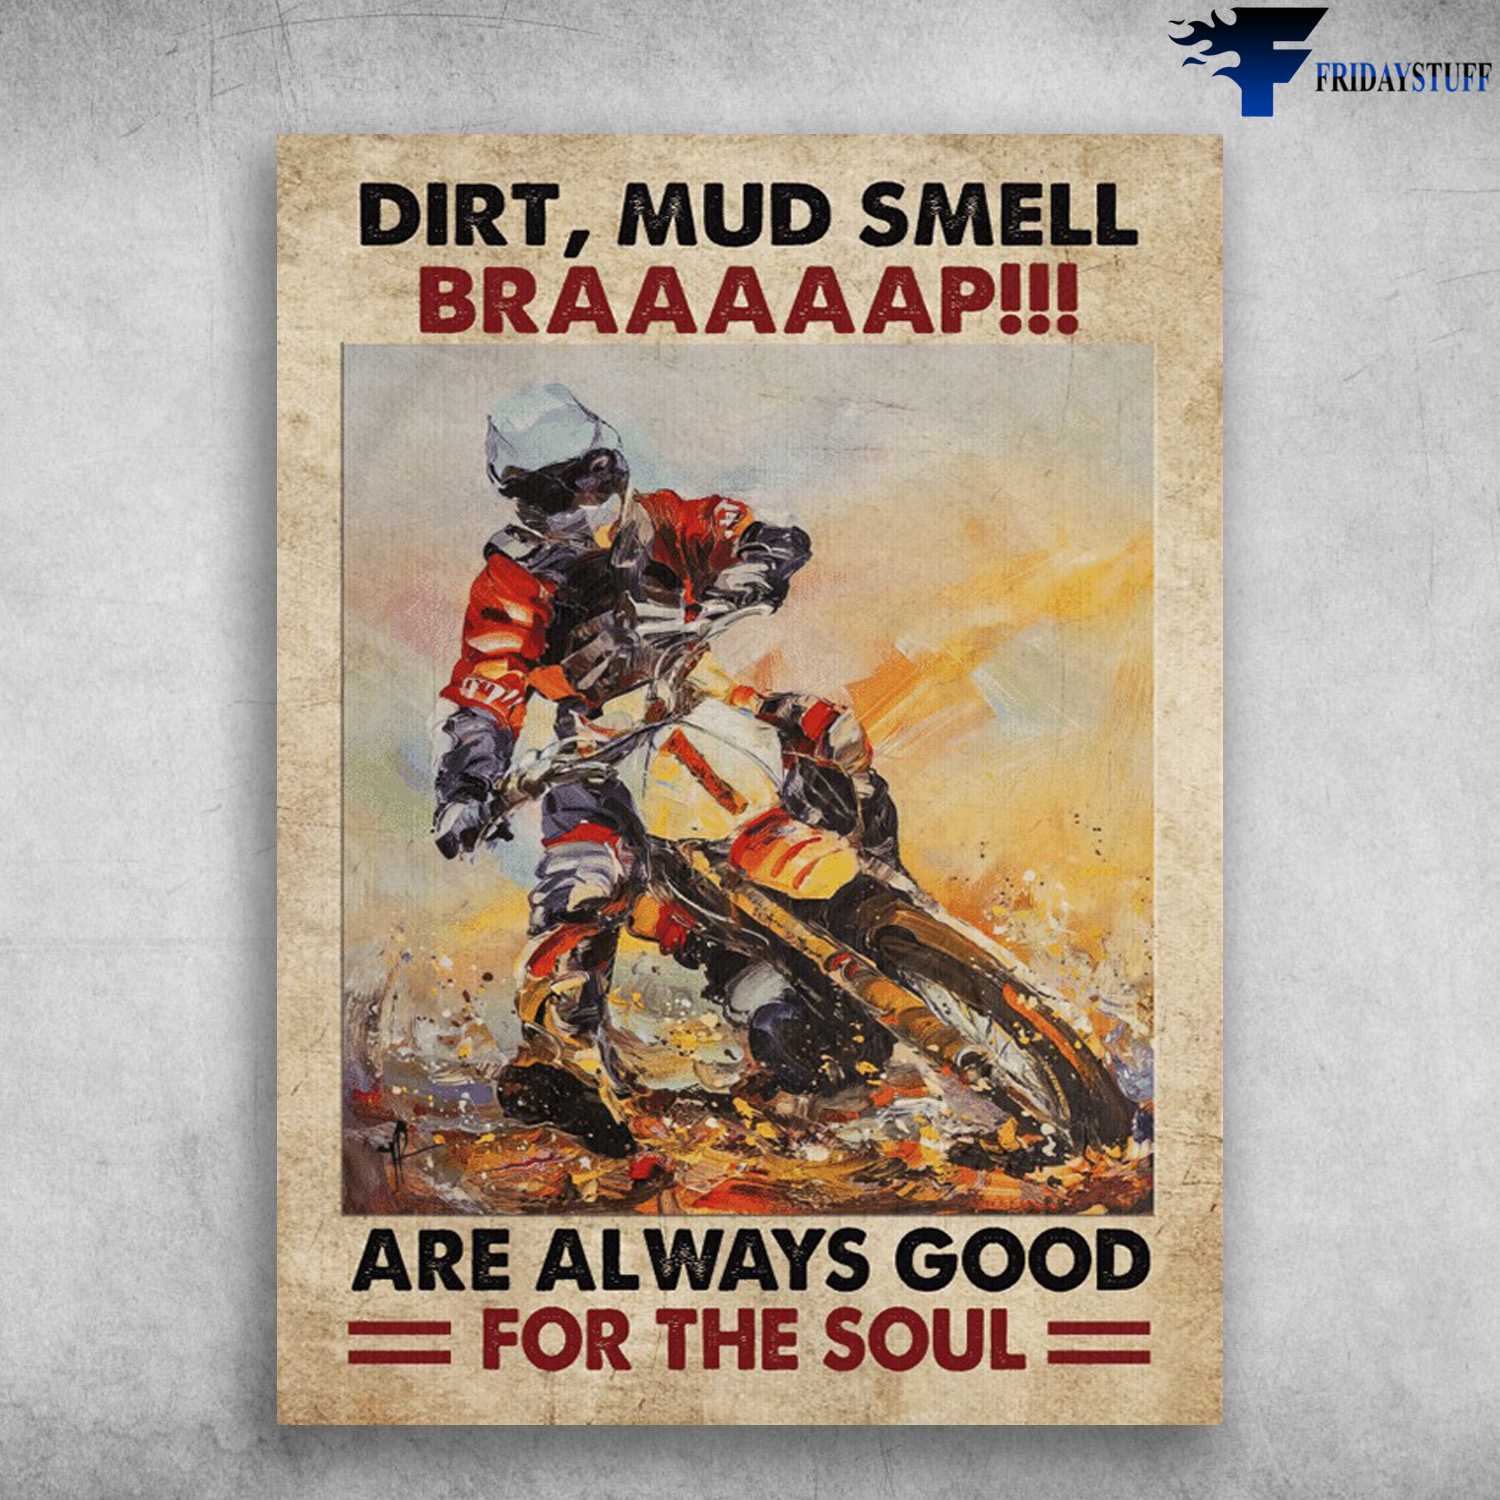 Motocross Poster, Dirtbike Lover - Dirt, Mud Smell, Braaaaap, Are Always Good, For The Soul